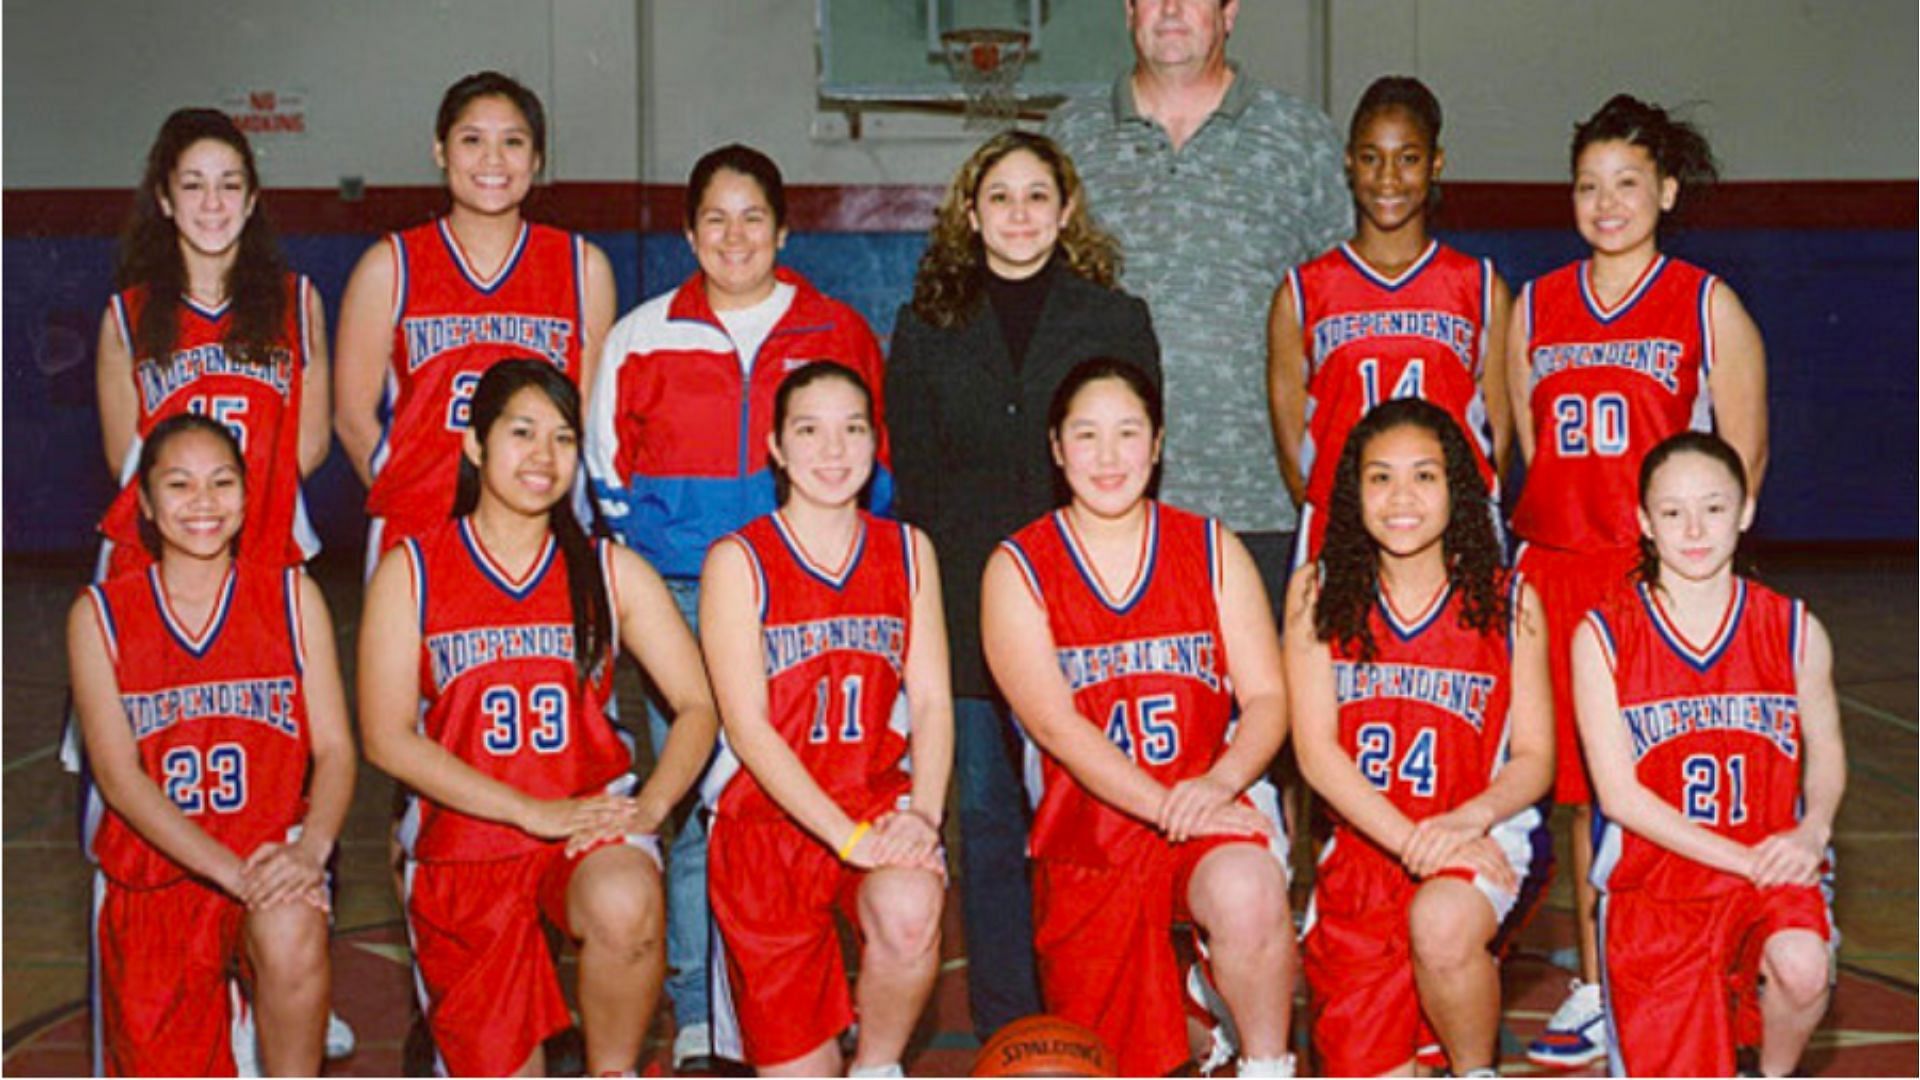 WWE Superstar Bayley posing with her college basketball team